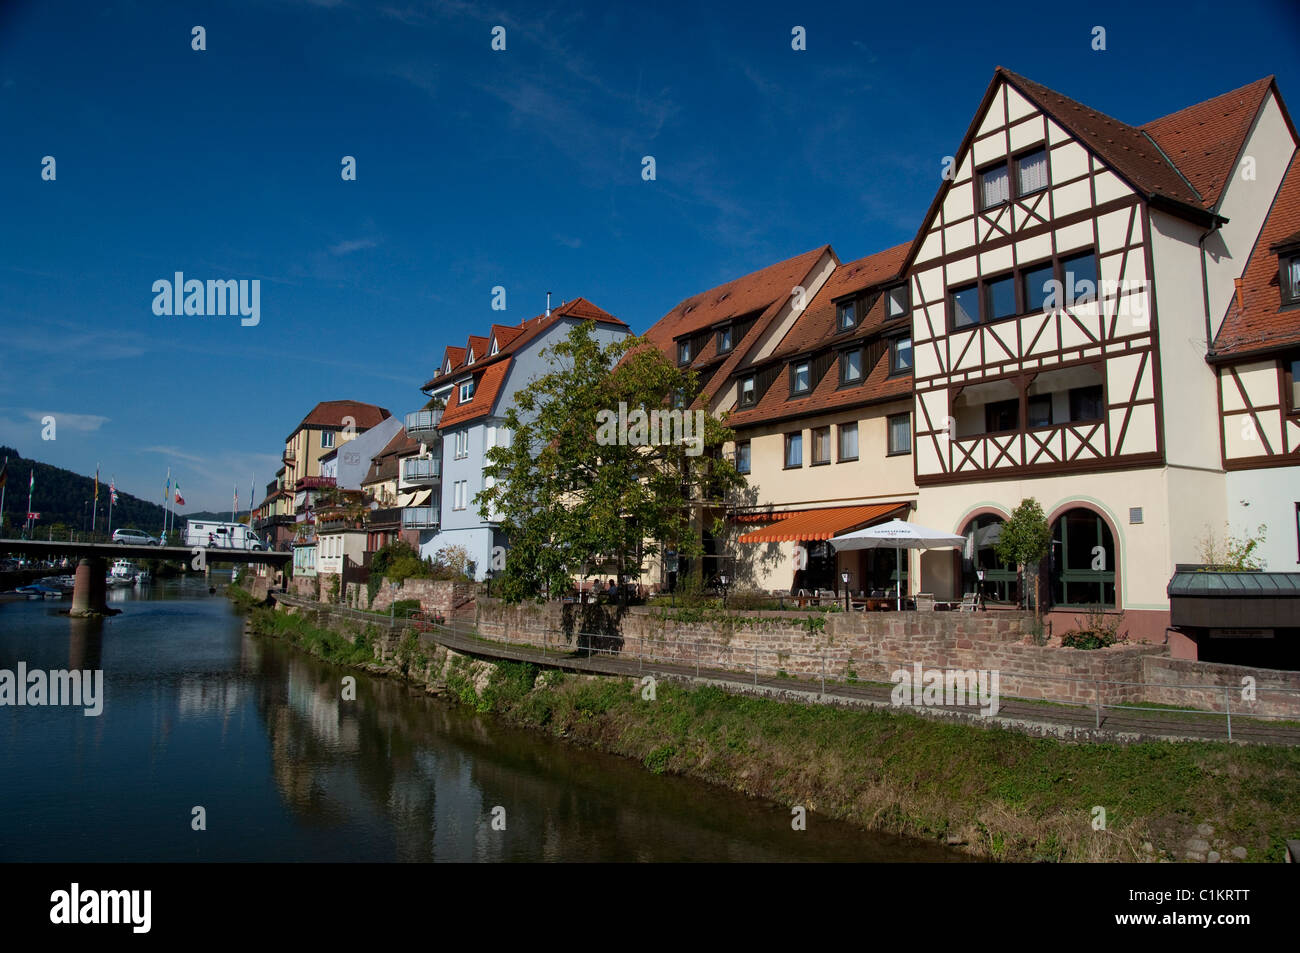 Germany, Franconia, Wertheim. Historic homes along the Tauber River. Stock Photo